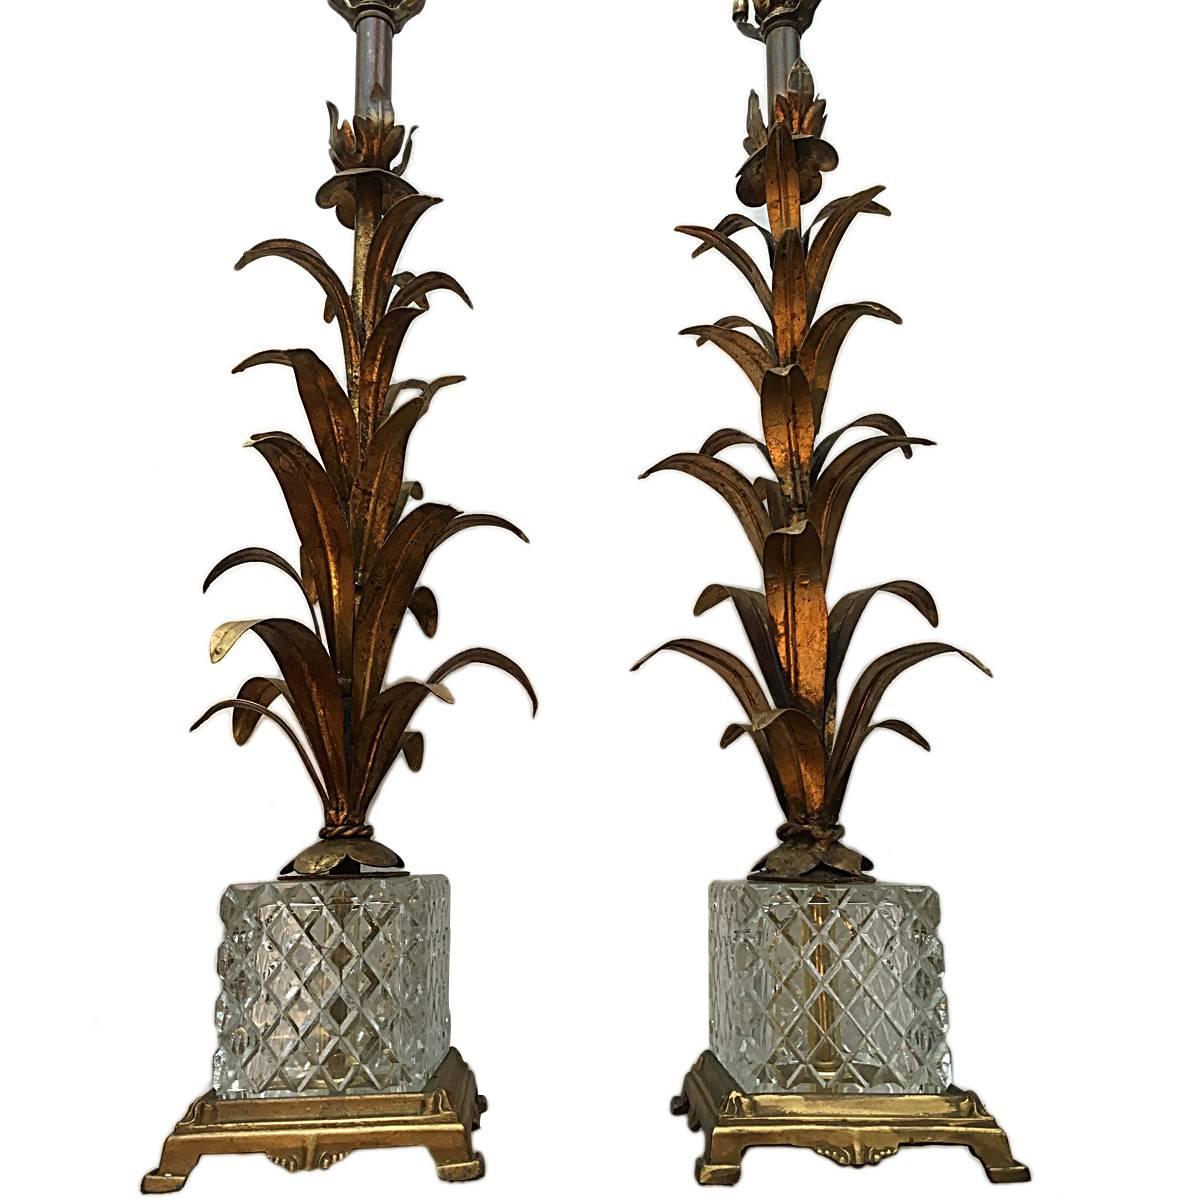 A pair of Italian, circa 1950s gilt metal palm tree lamps with a cut-glass and bronze base.
Measure: 21